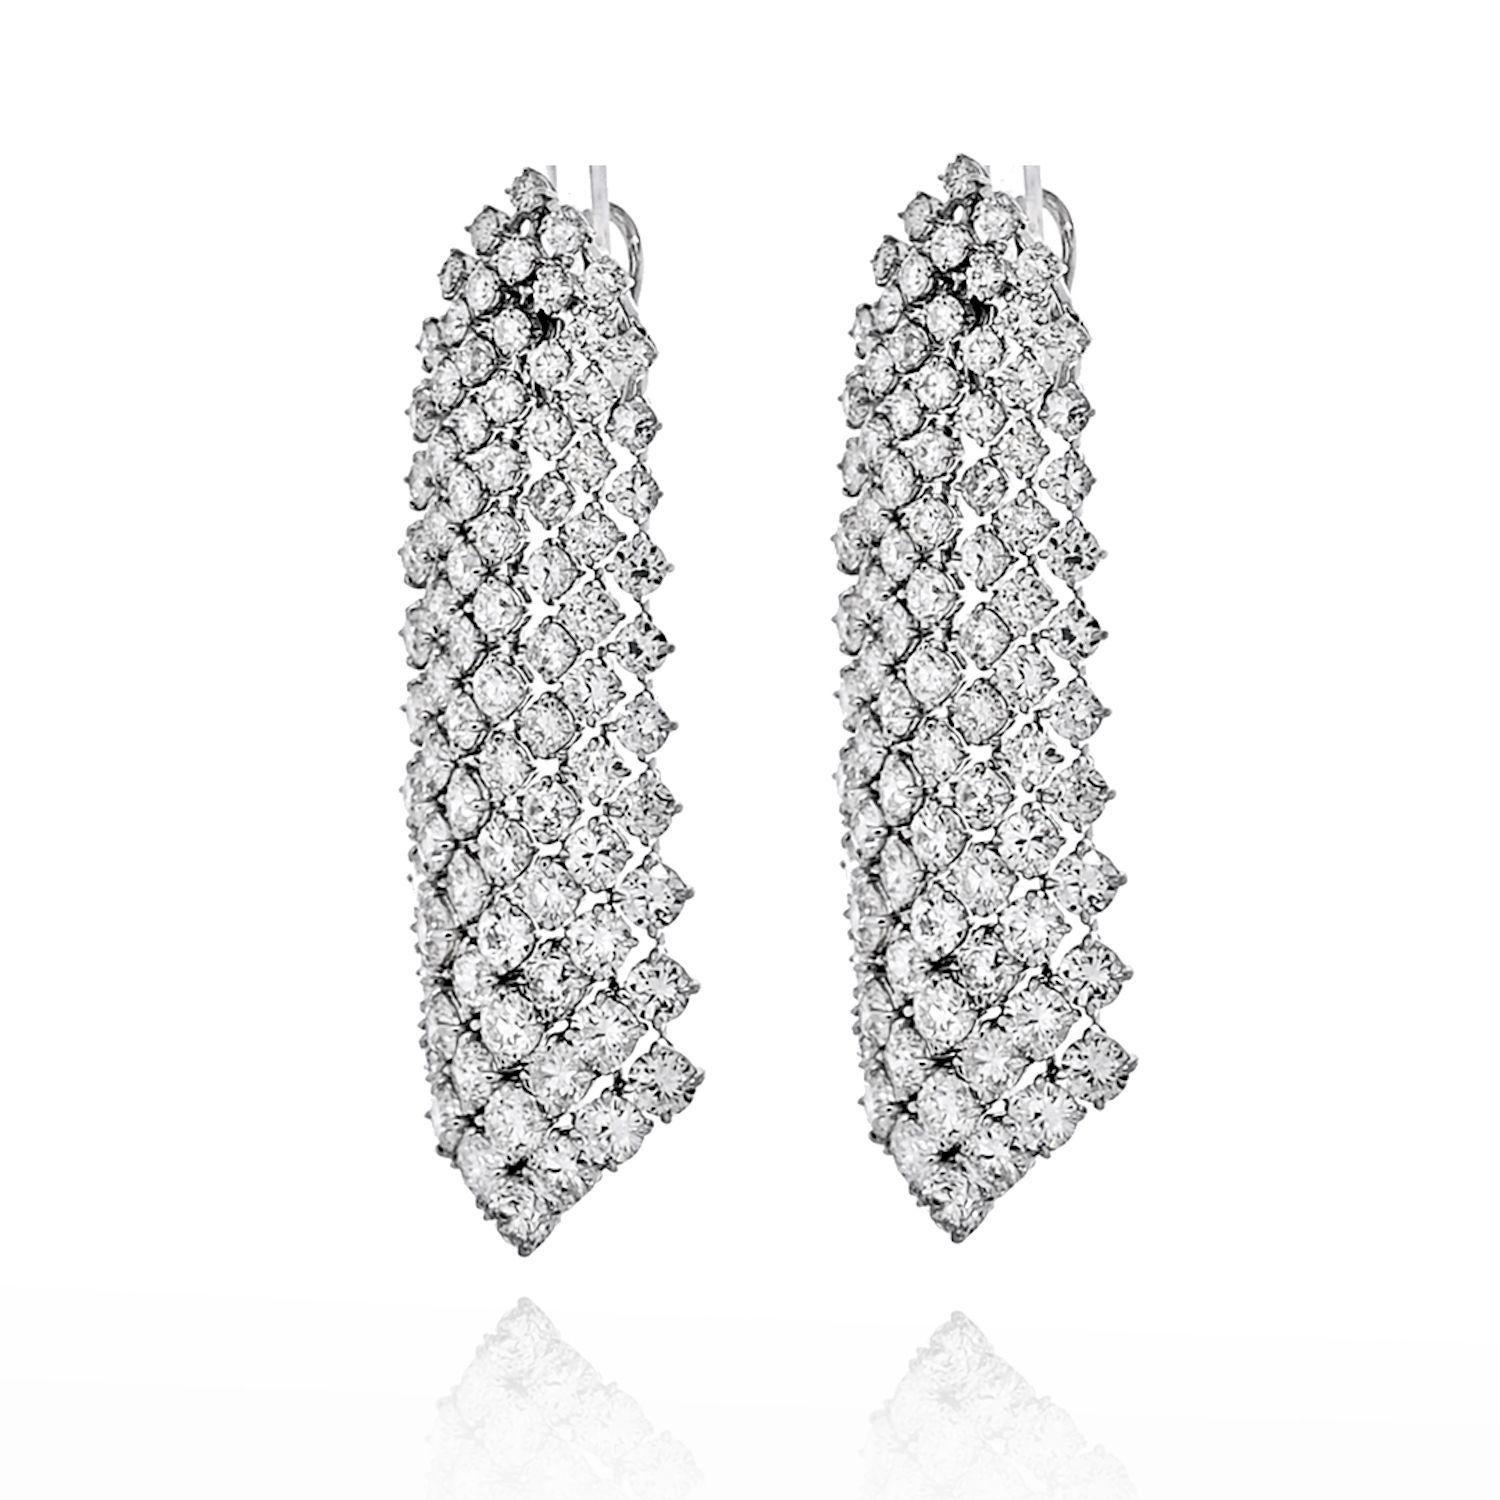 Absolutely stunning these earrings will stop traffic. Crafted in Platinum with rows of cascading round cut diamonds these dangling chandeliers is exactly what you need for your special event. Mounted with 35 carats of round cut diamonds, all of